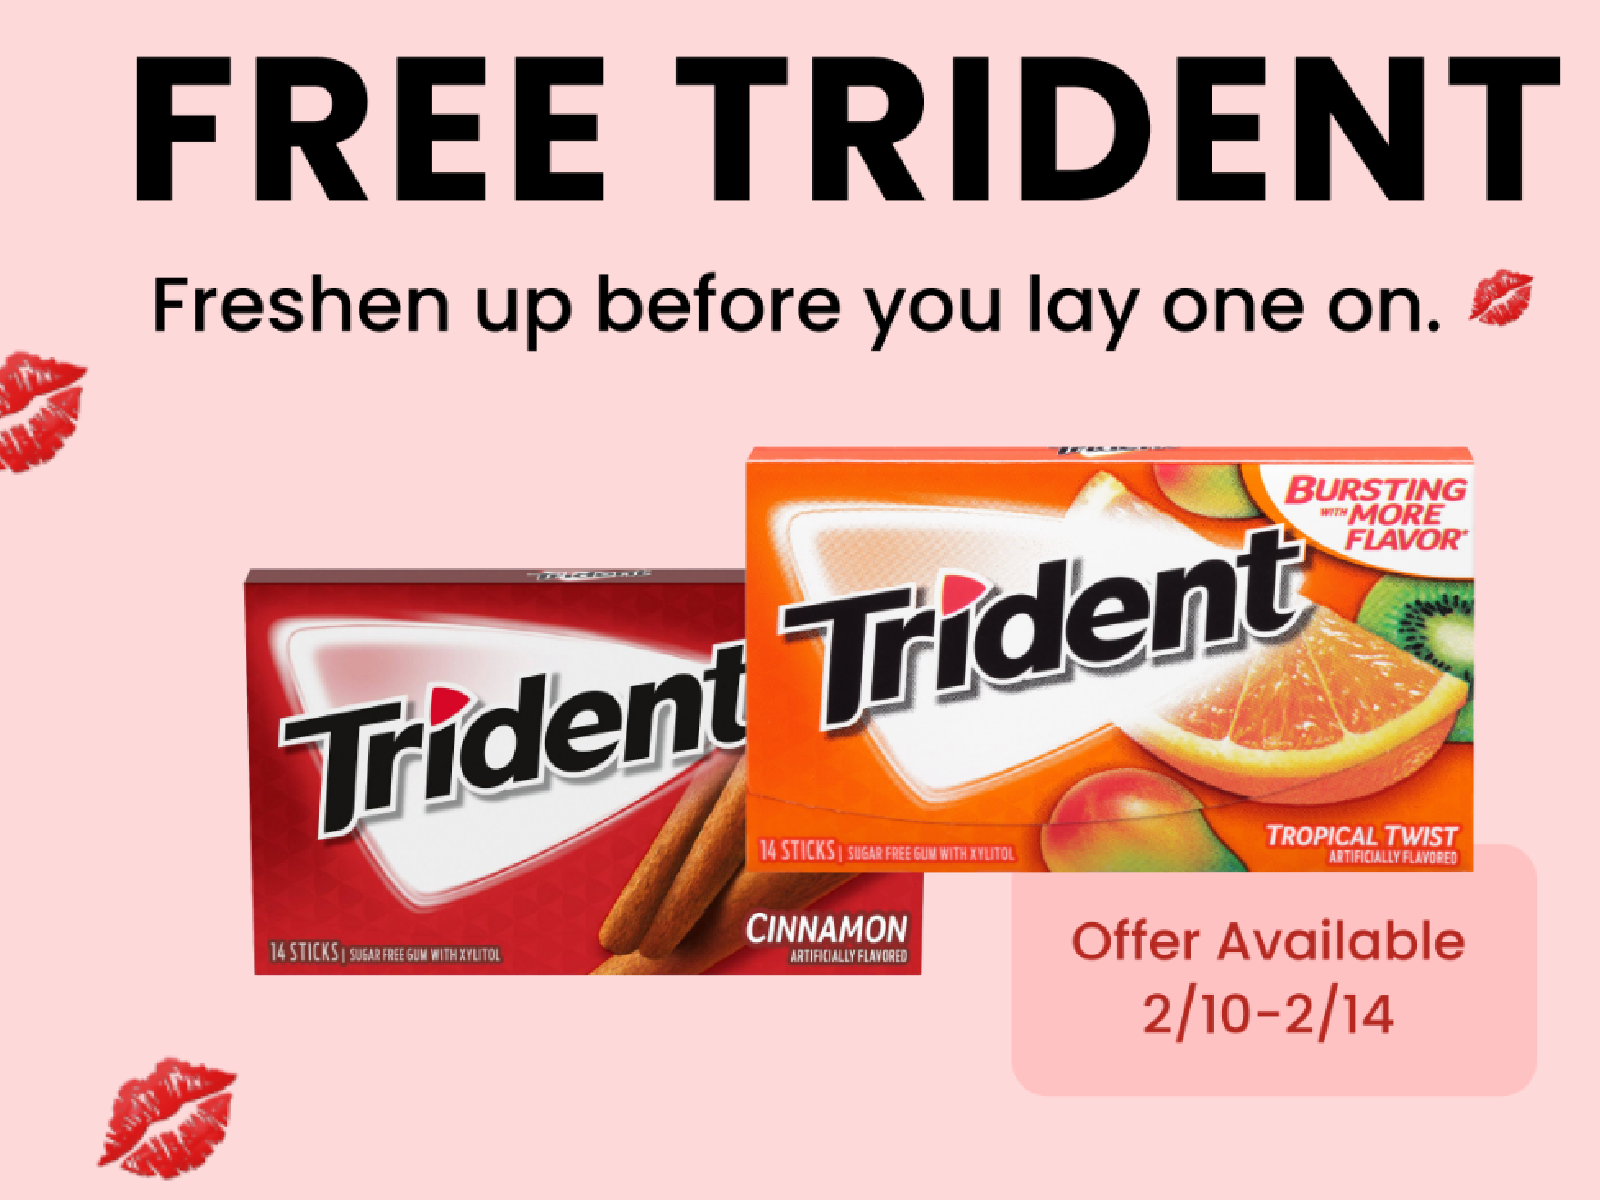 FREE Trident Gum On Coupons.com App on I Heart Publix